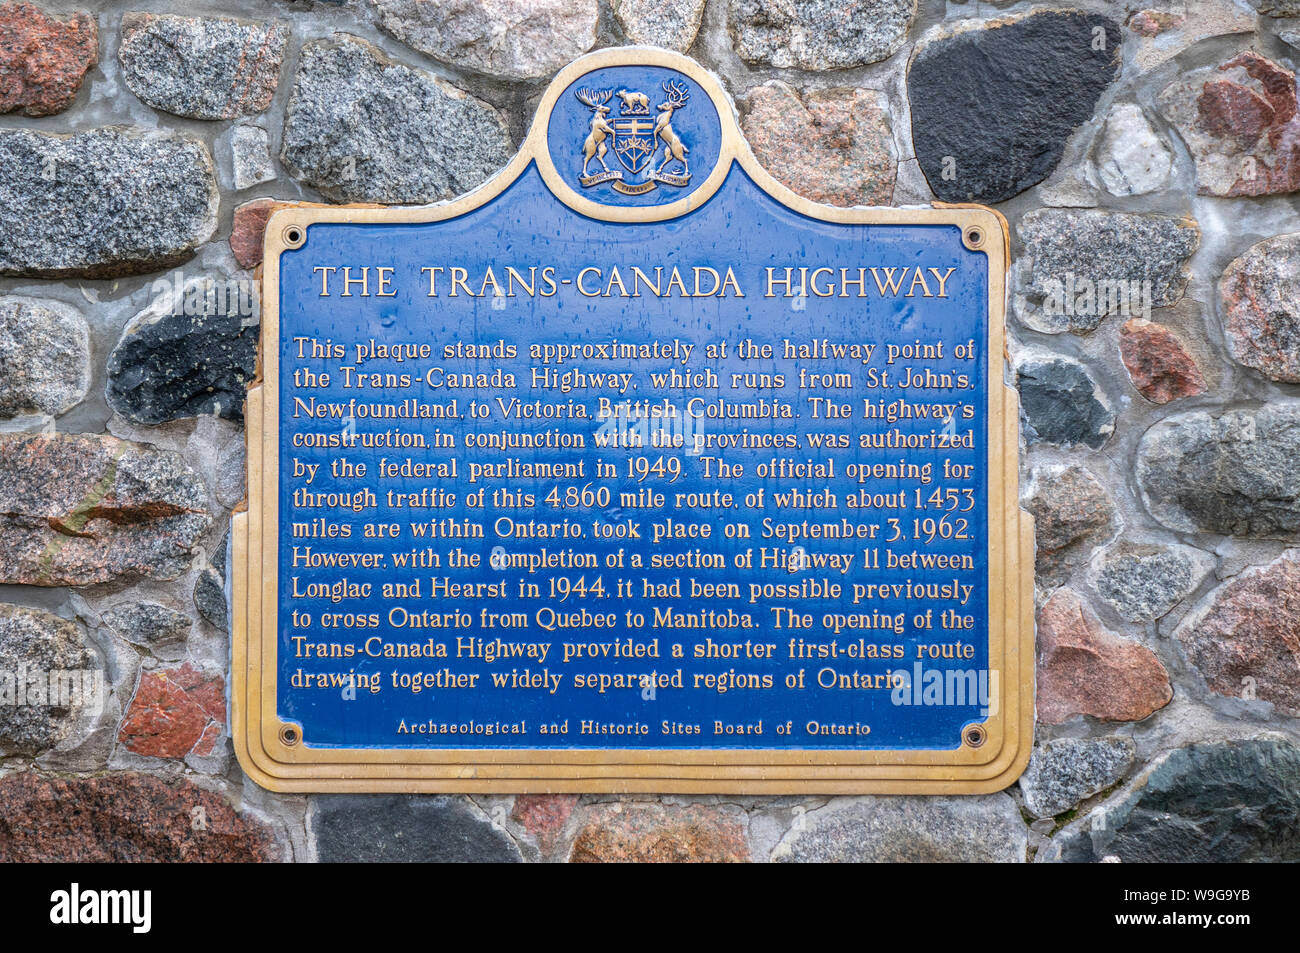 An Ontario Government Trans Canada Highway Historic Plaque Marking The Halfway Point Between St John’s Newfoundland And Victoria British Columbia. Stock Photo